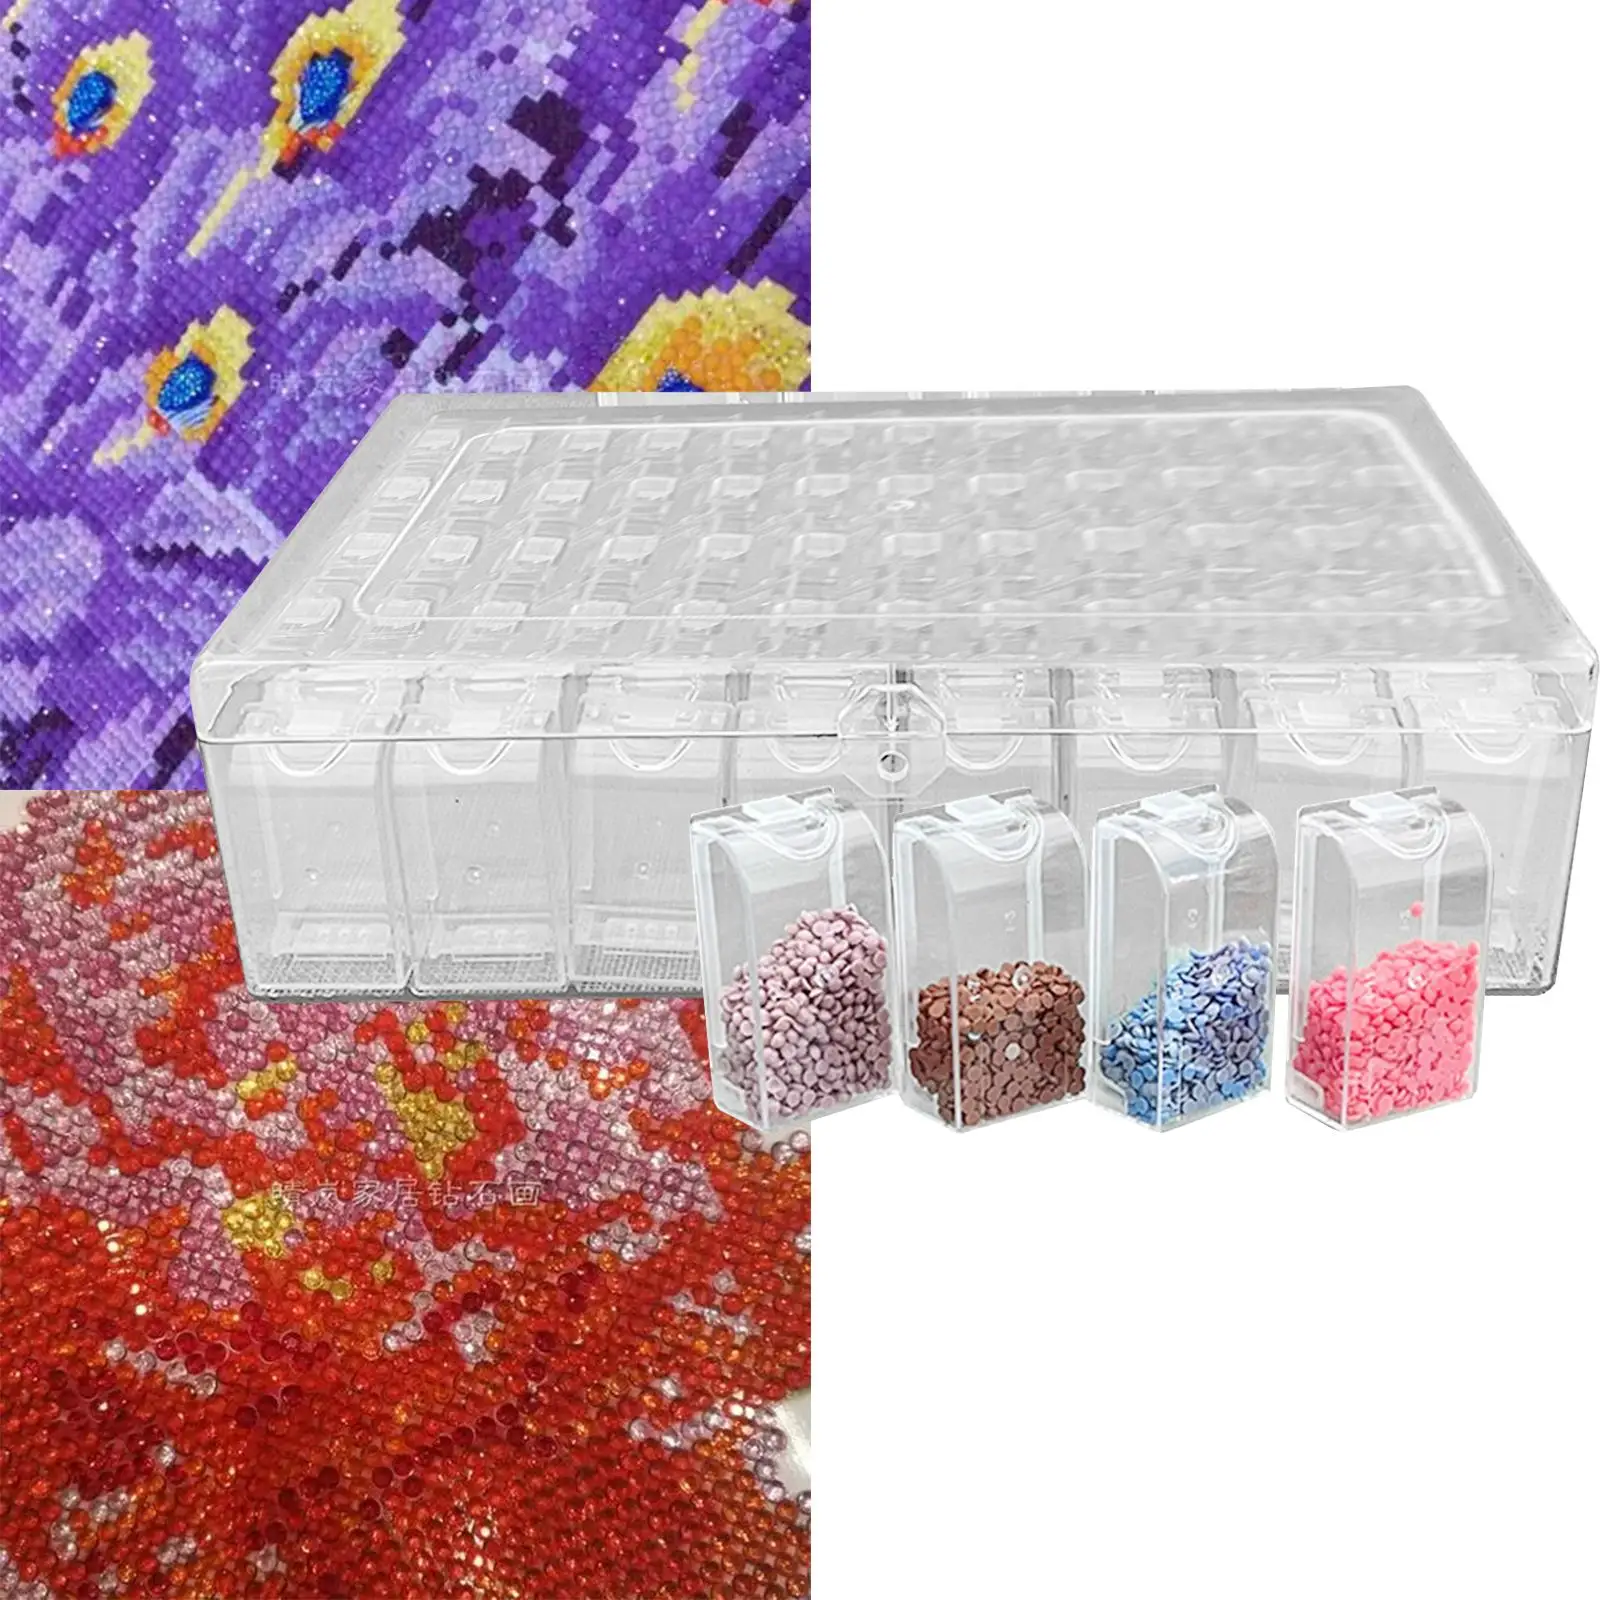 Bead Storage Containers Set Plastic Compartments W/ Diamond Painting Tray Diamond Bead Storage Container for Fishing Tackles